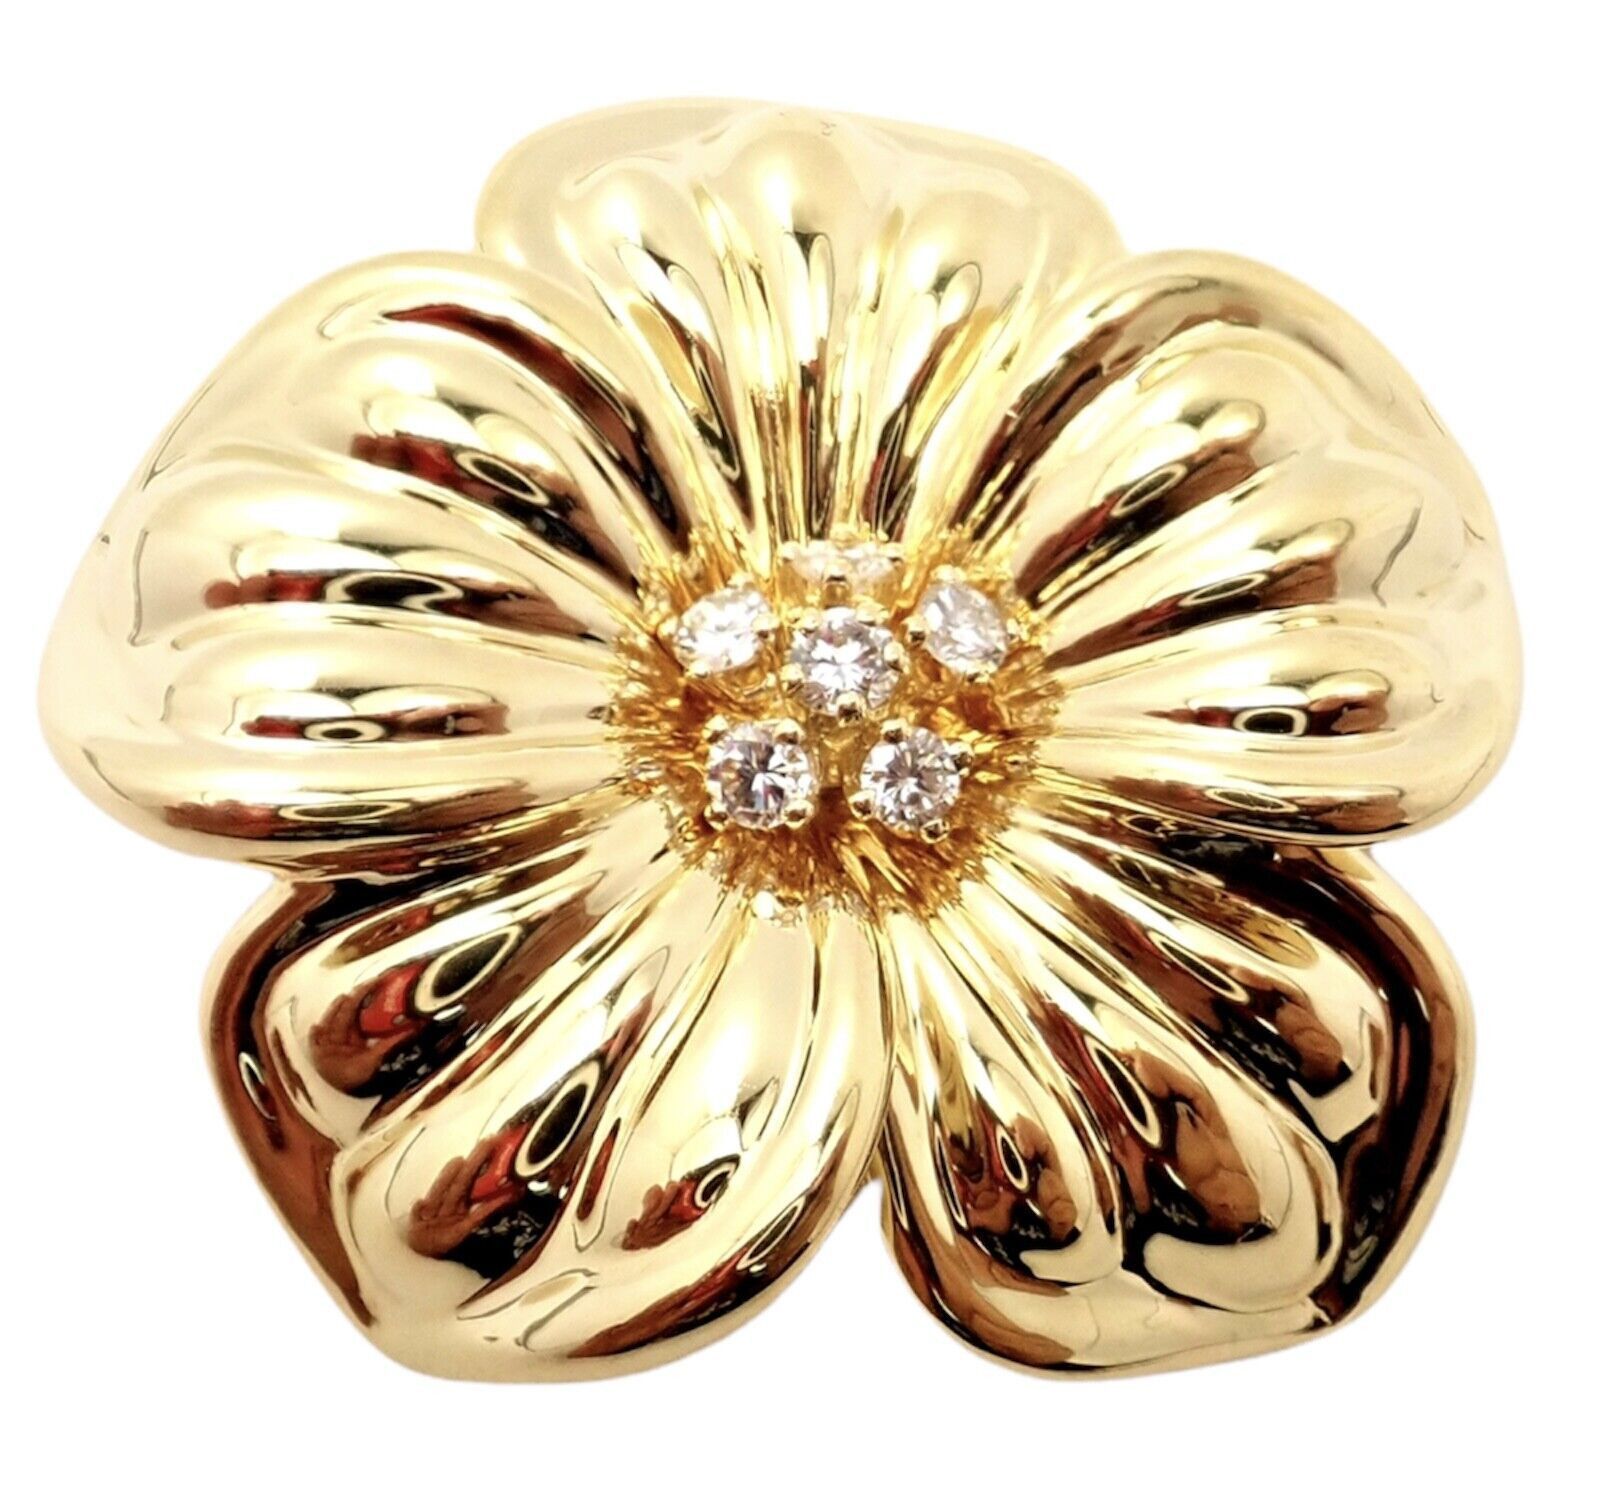 Van Cleef & Arpels Diamond 18k Yellow Gold Magnolia Flower Pin Brooch Size ONE SIZE - 7 Thumbnail